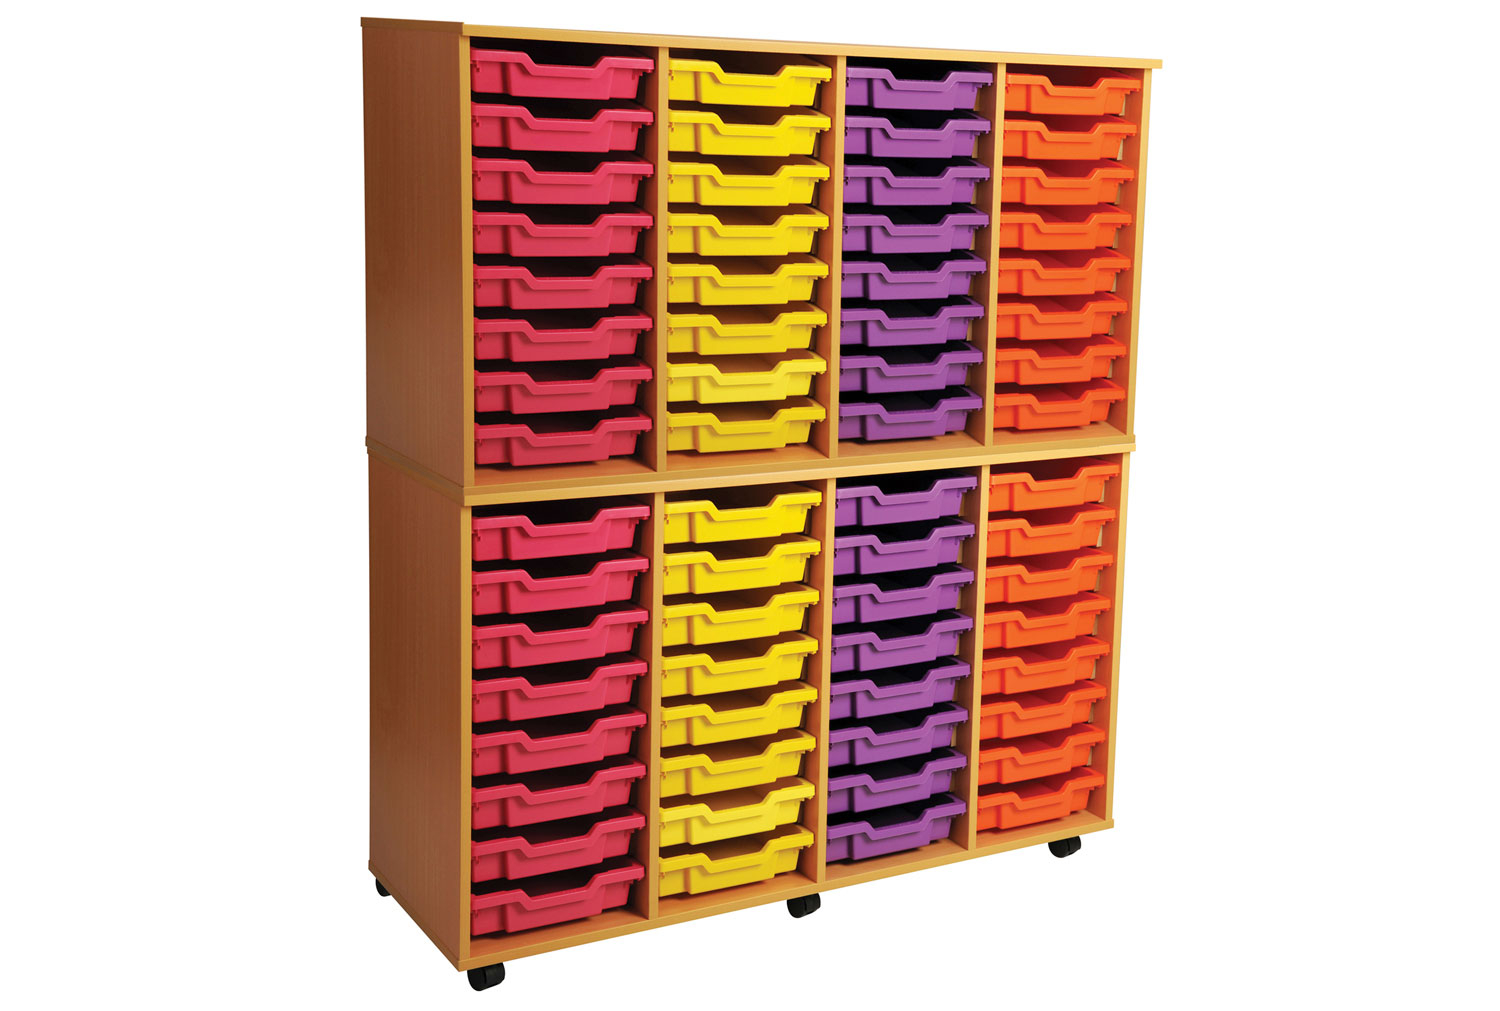 Primary 4 Column Mobile Classroom Tray Storage Unit With 64 Shallow Classroom Trays, Beech/ Blue Classroom Trays